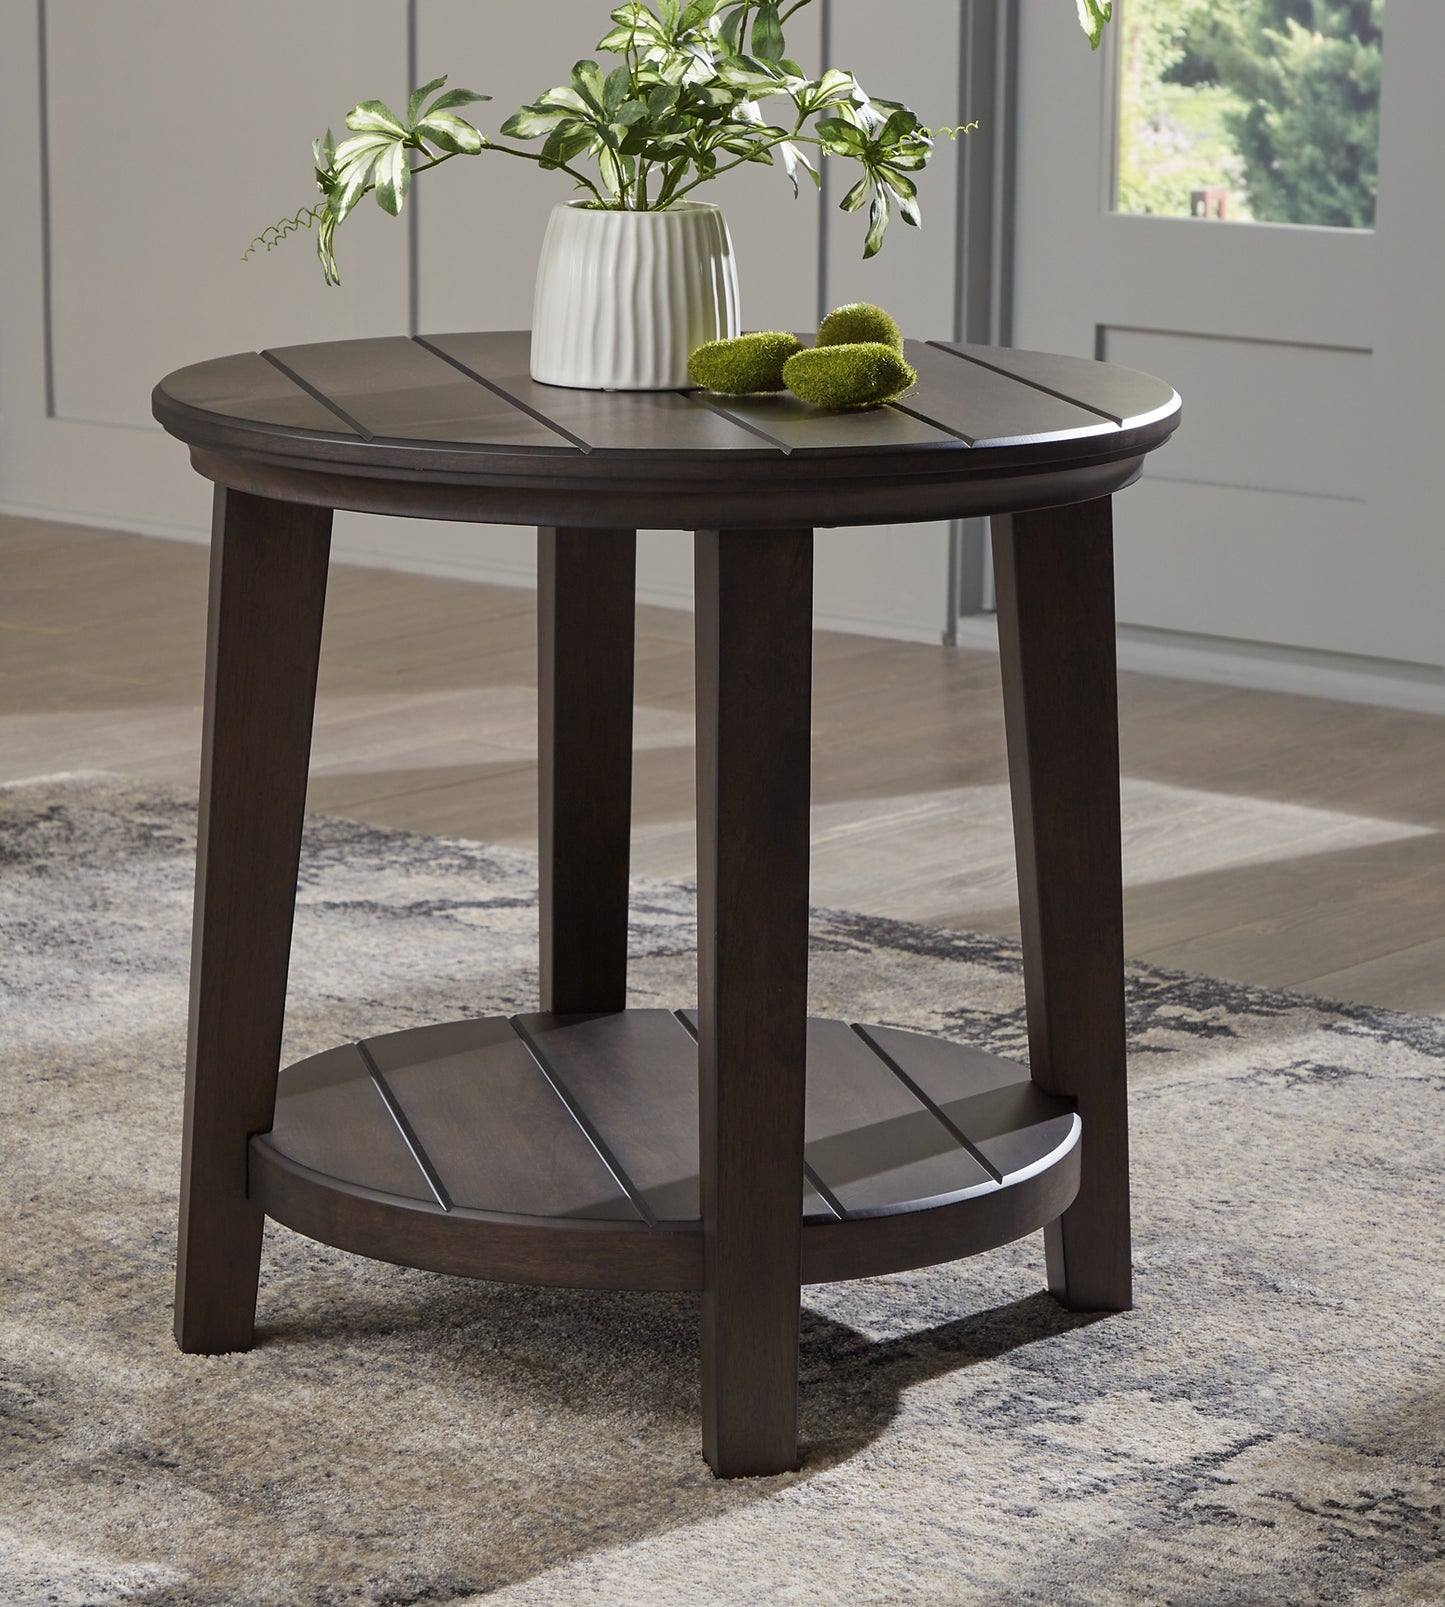 Celamar Round End Table